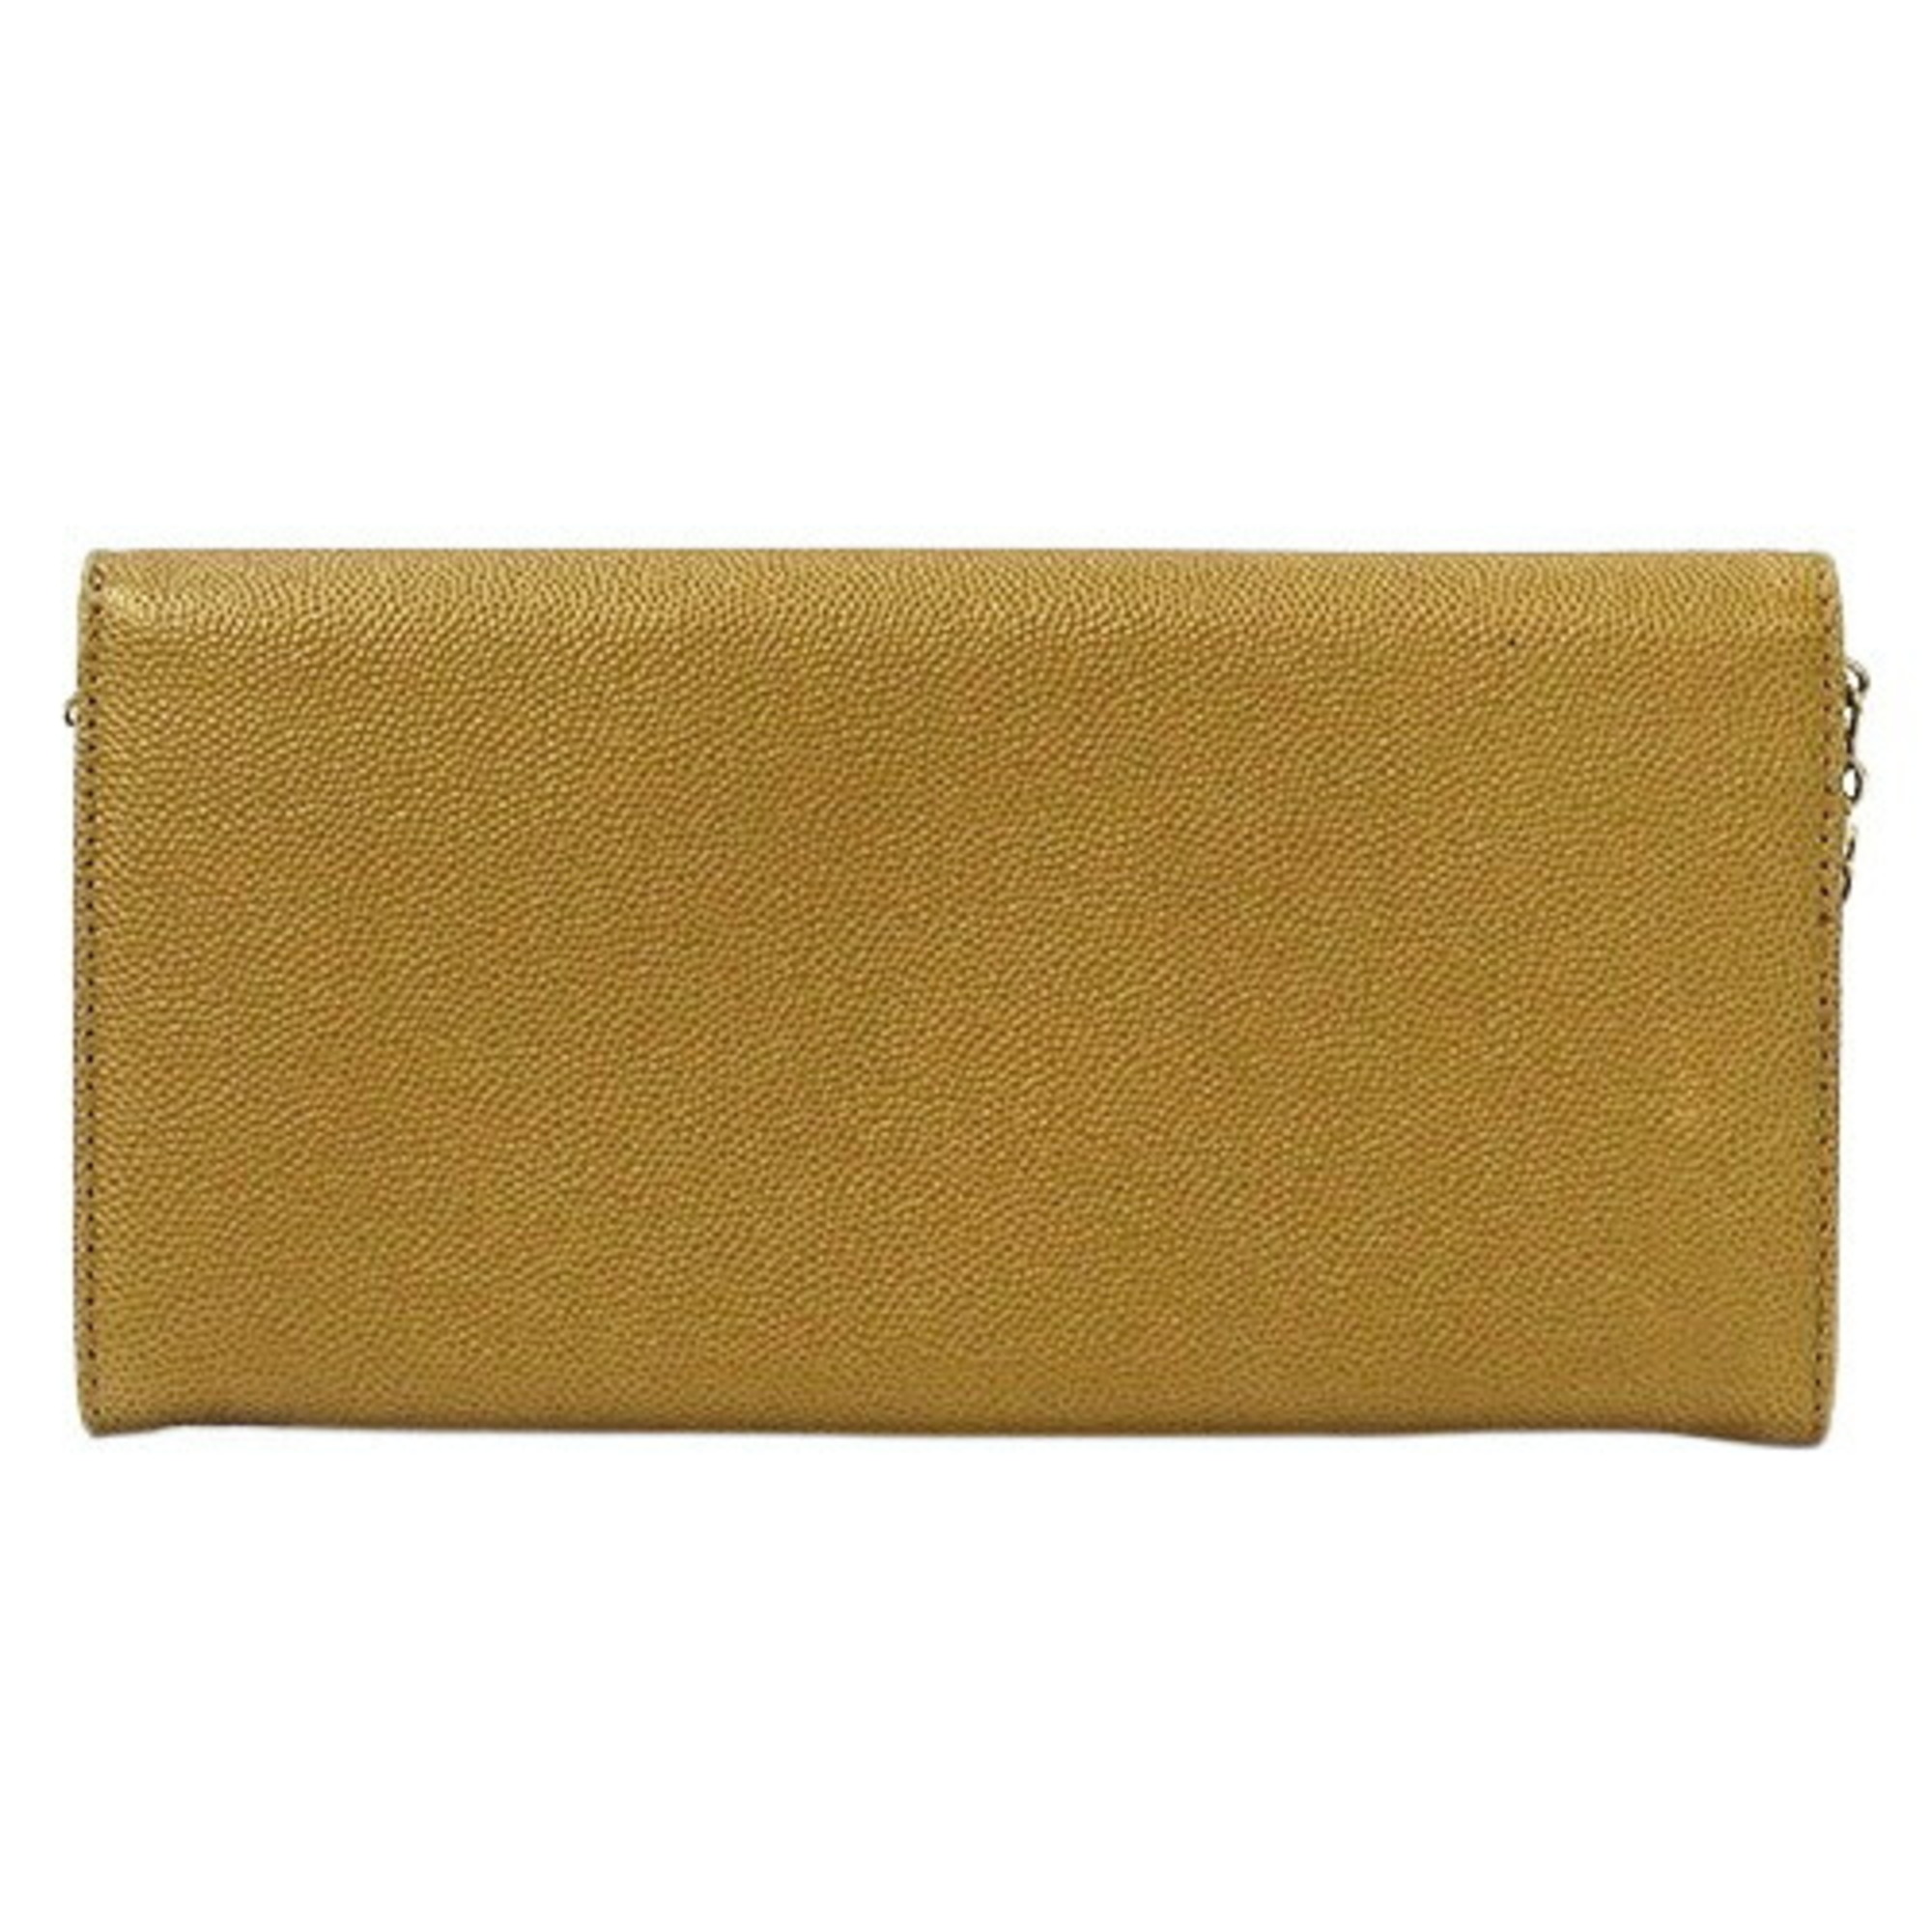 Christian Dior Dior Wallet Women's Brand Long Chain Leather Camel